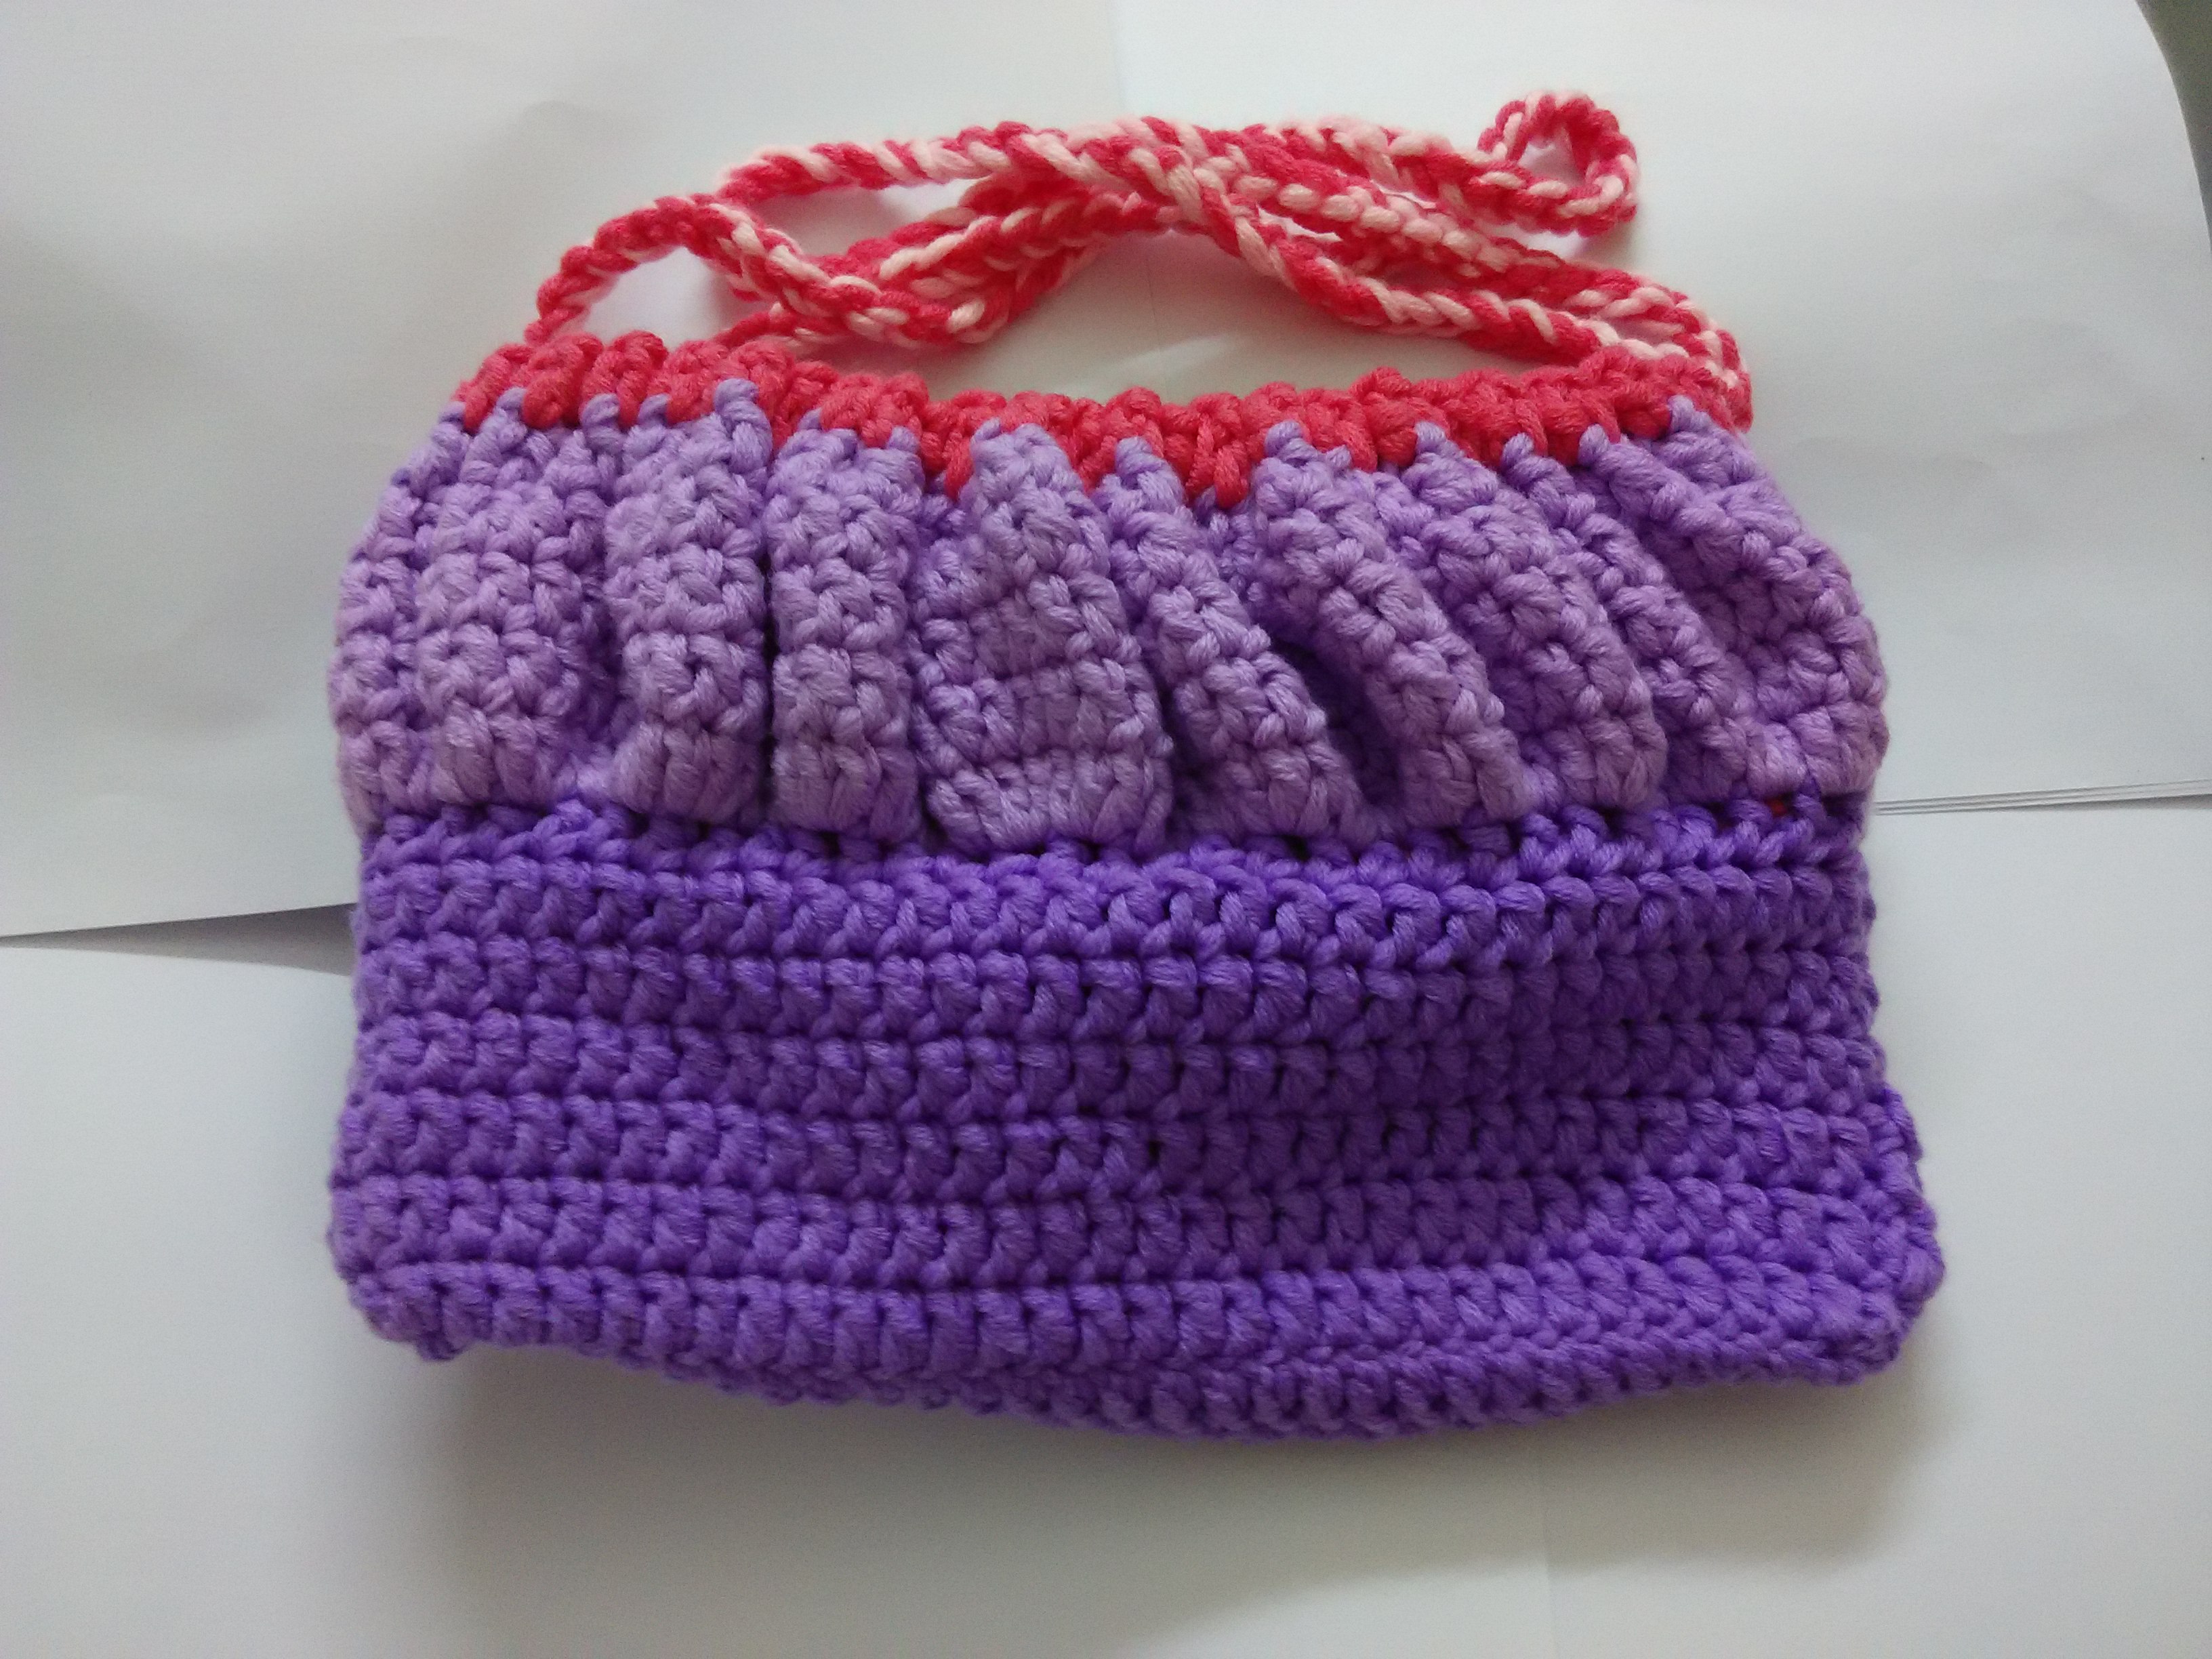 Crocheted bag I made for my daughter